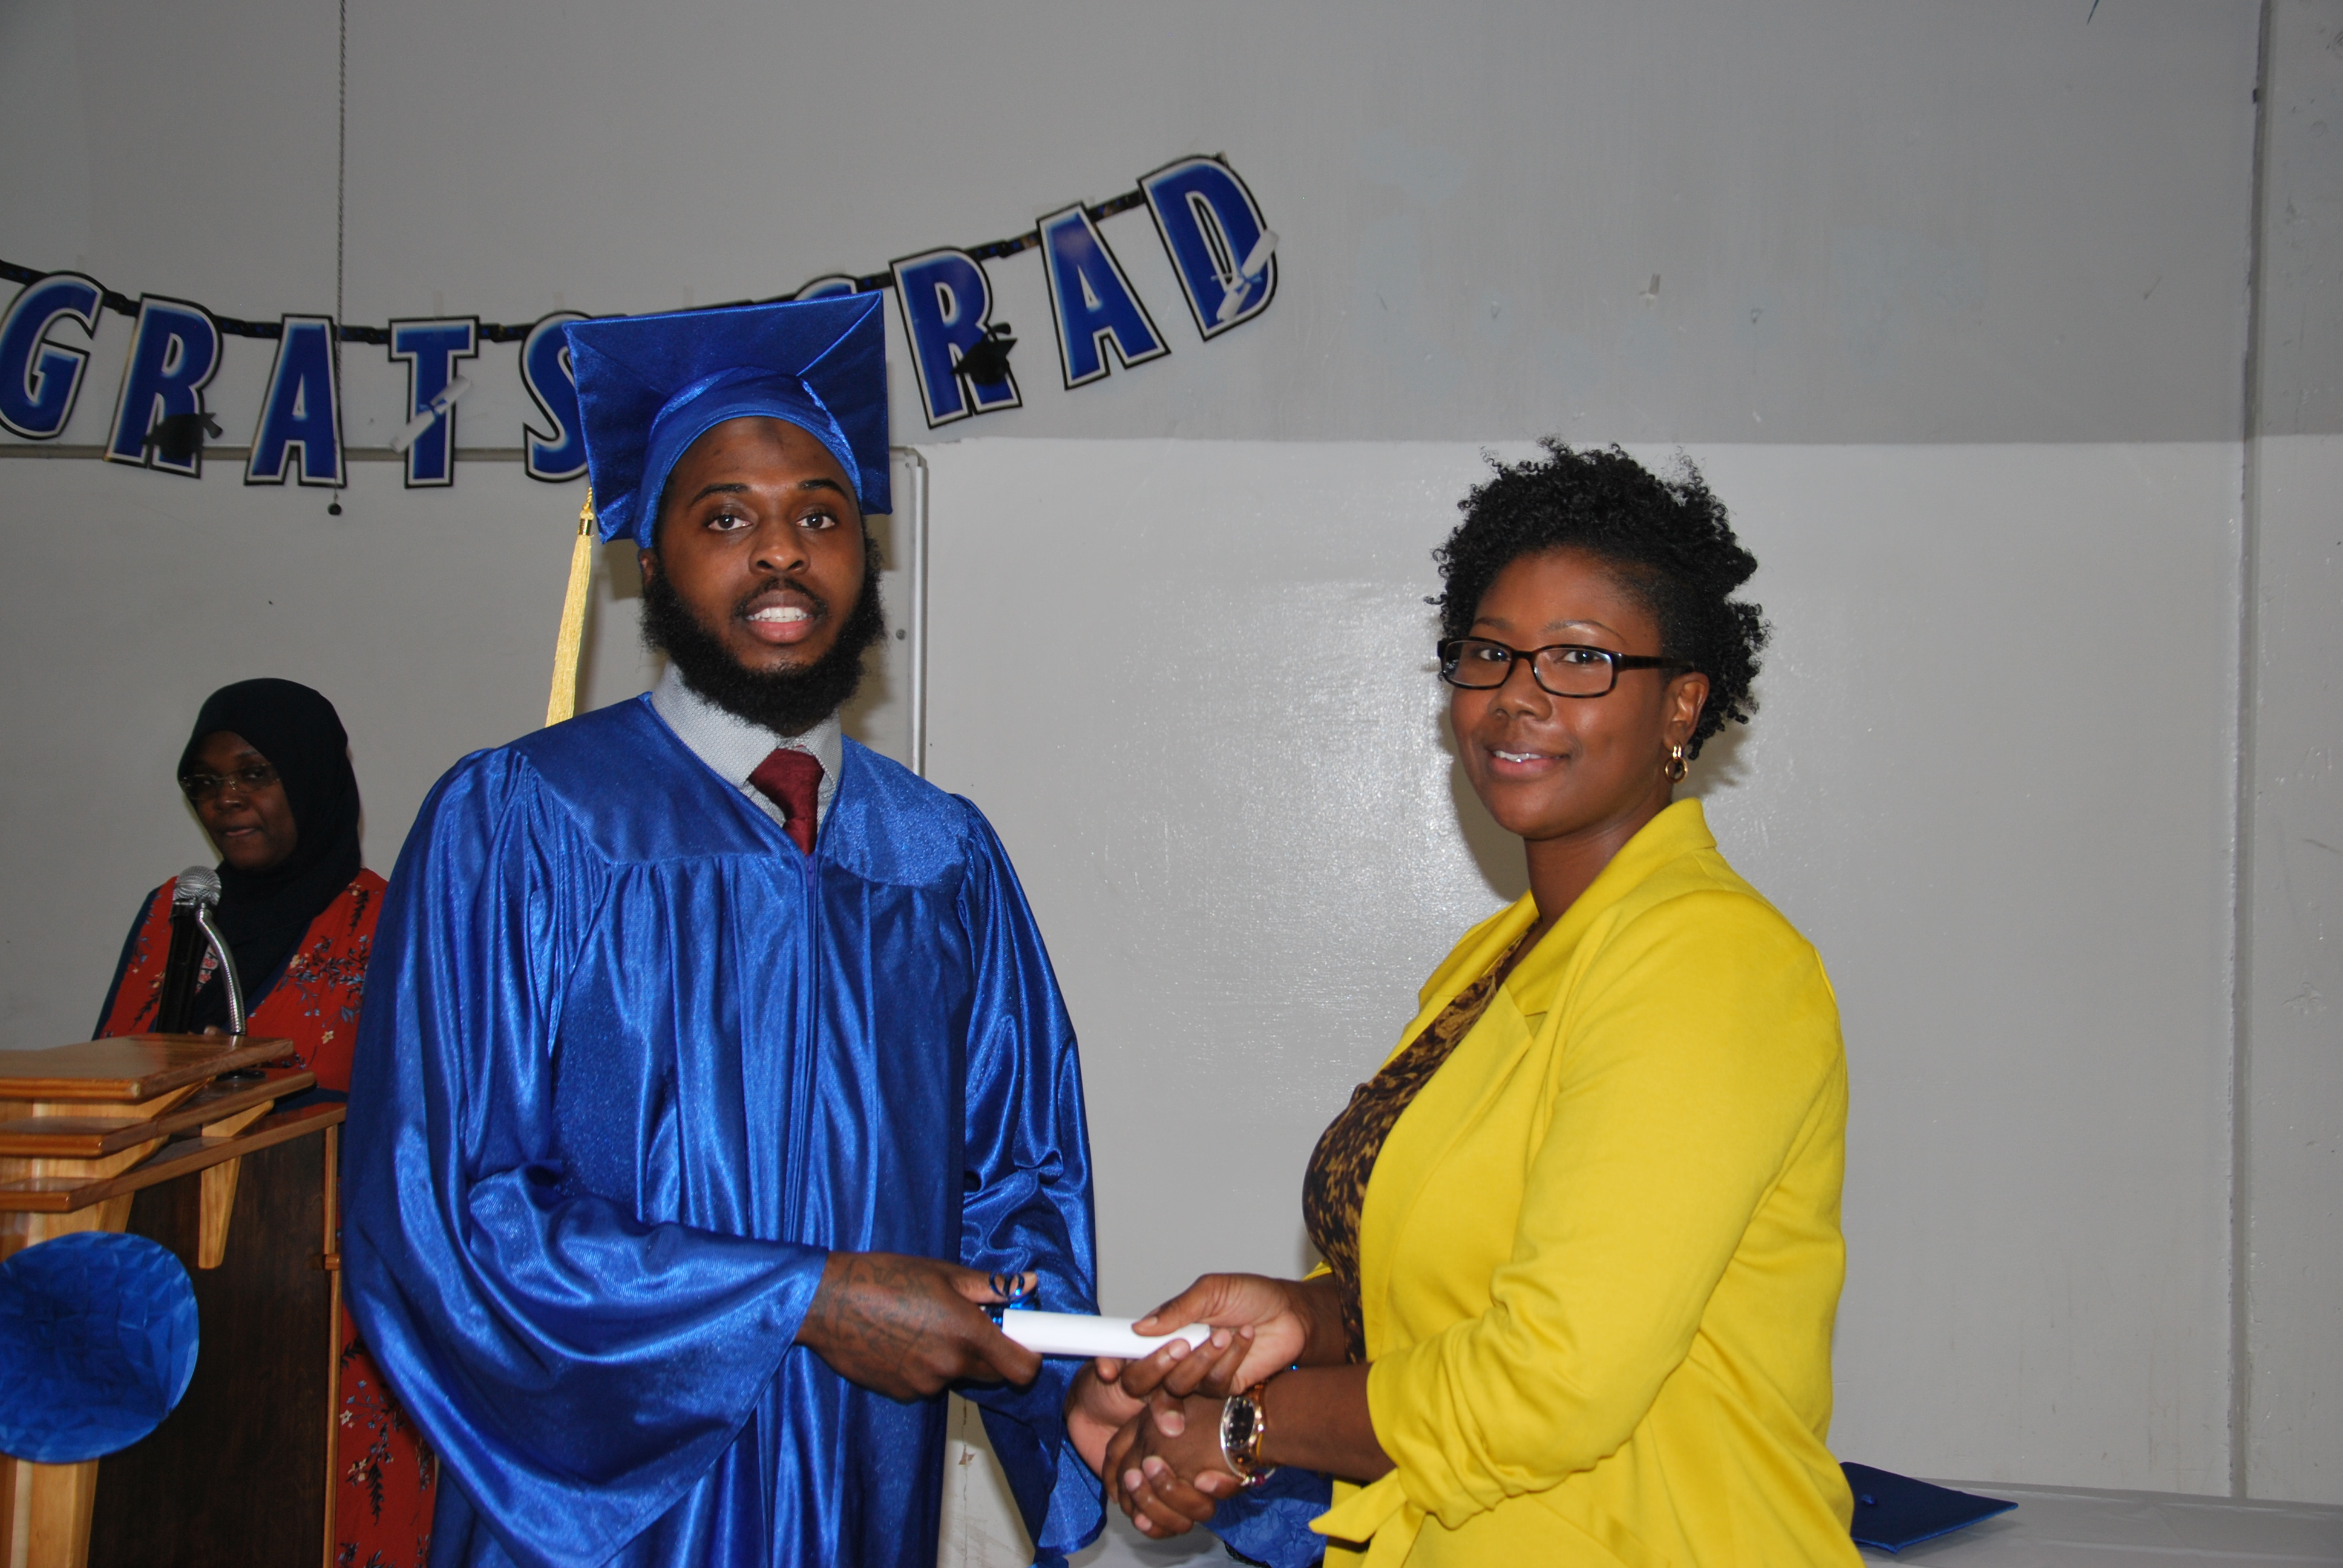 Resident Whanyah D. receives his diploma from Ms. Brooks, Education Manager